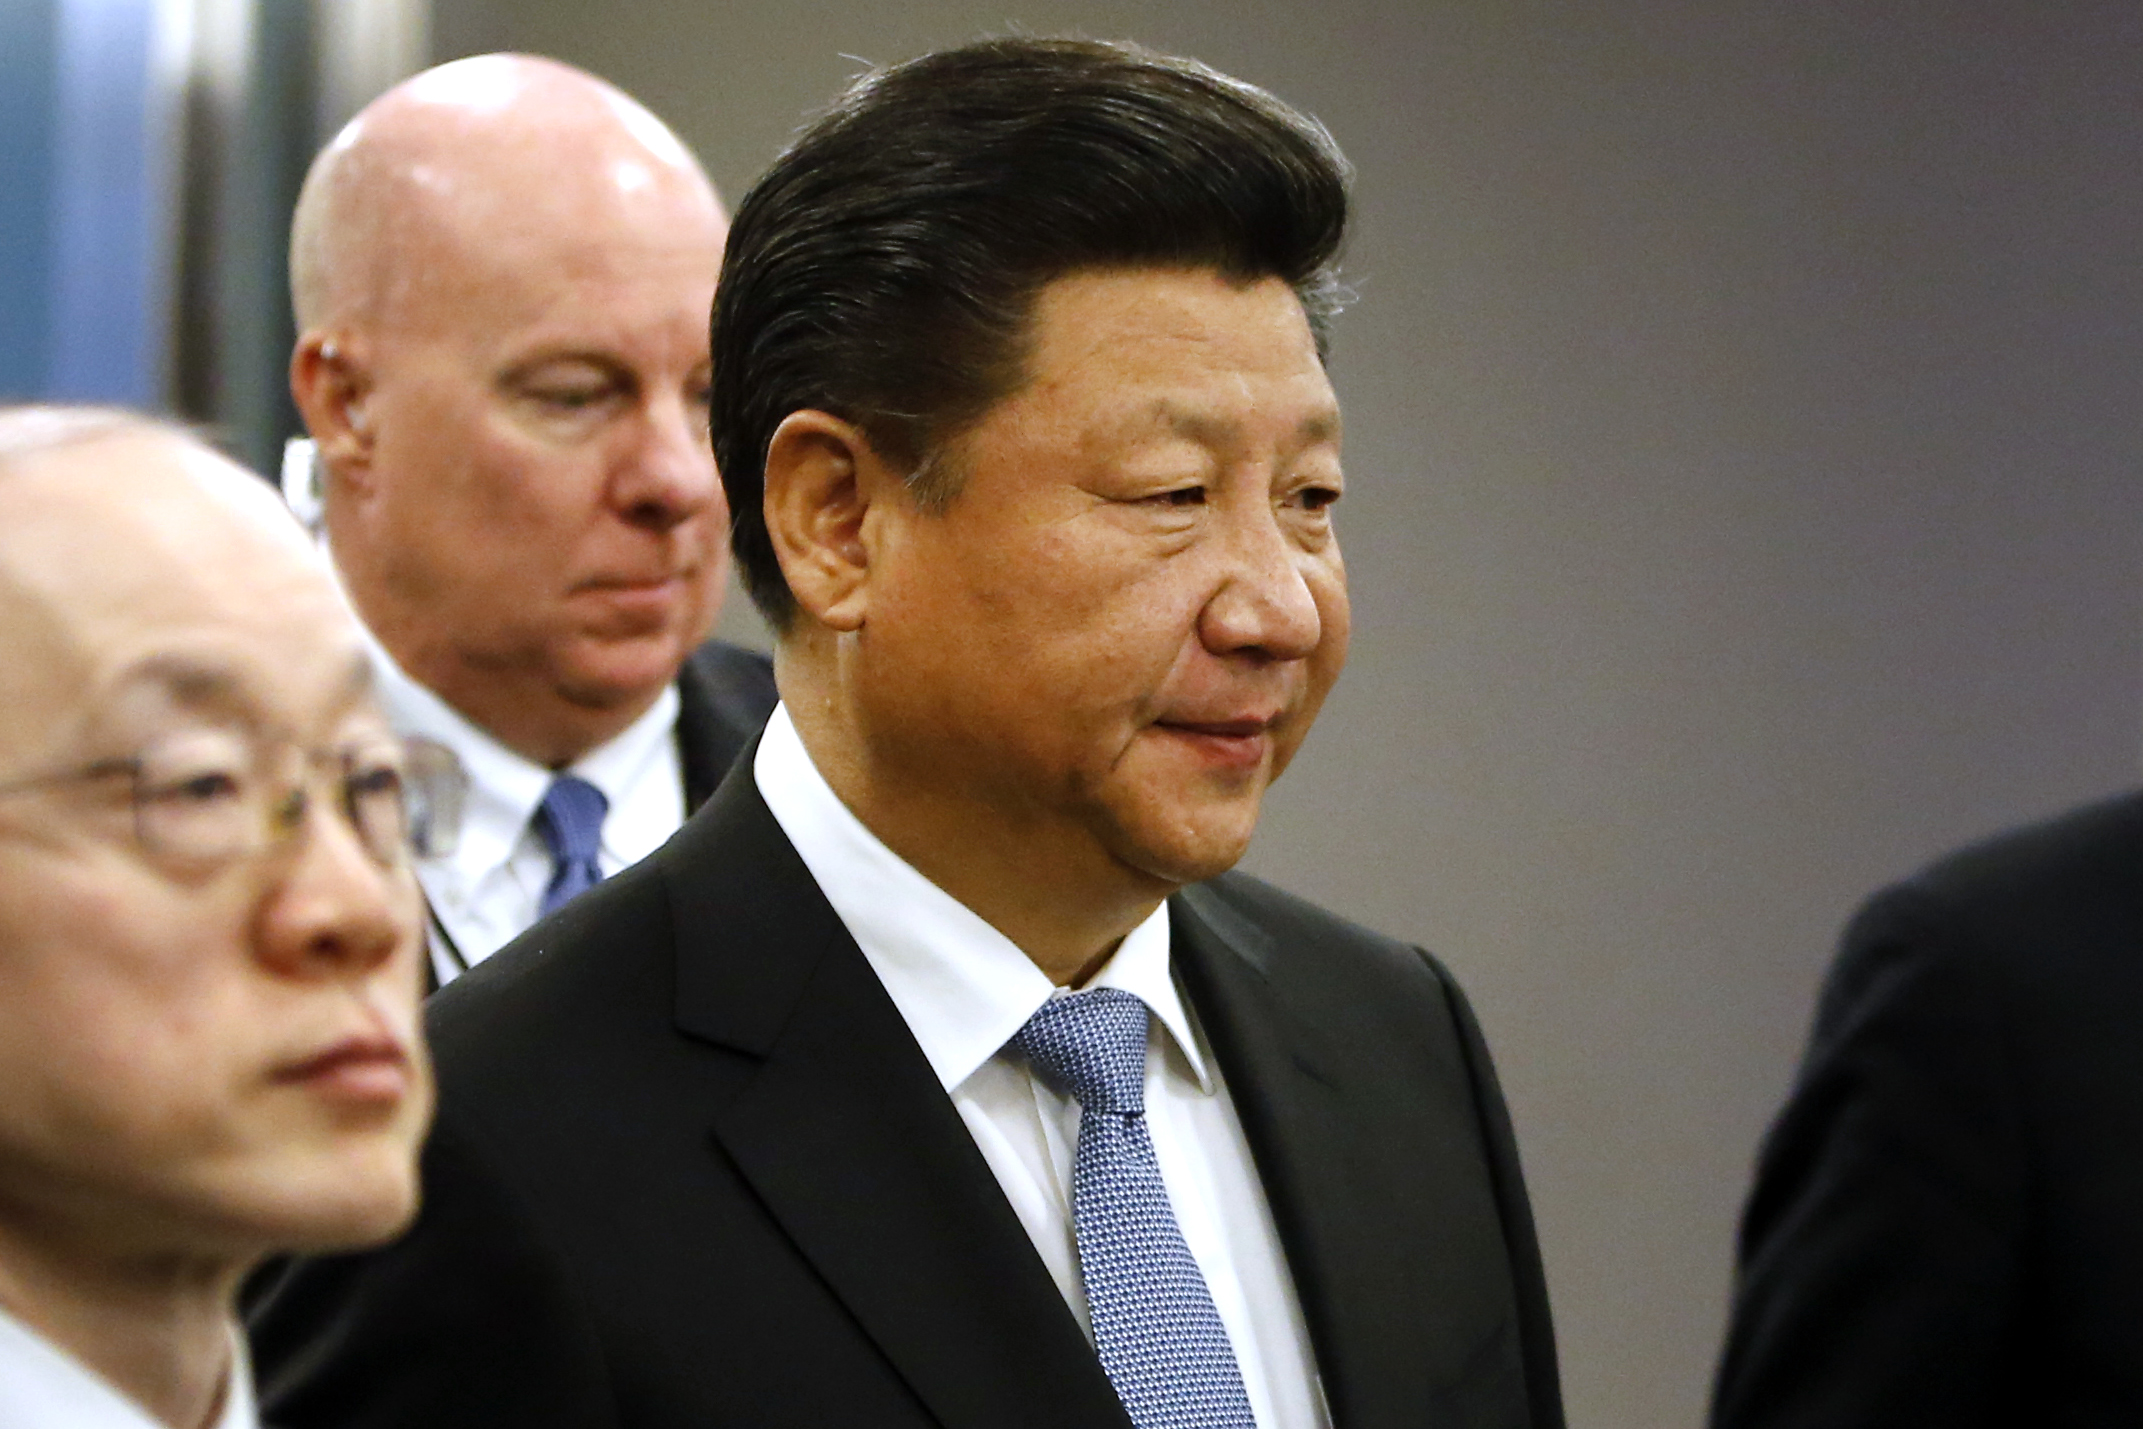 Chinese President Xi Jinping attends the UN General Assembly on Monday. Photo: AP